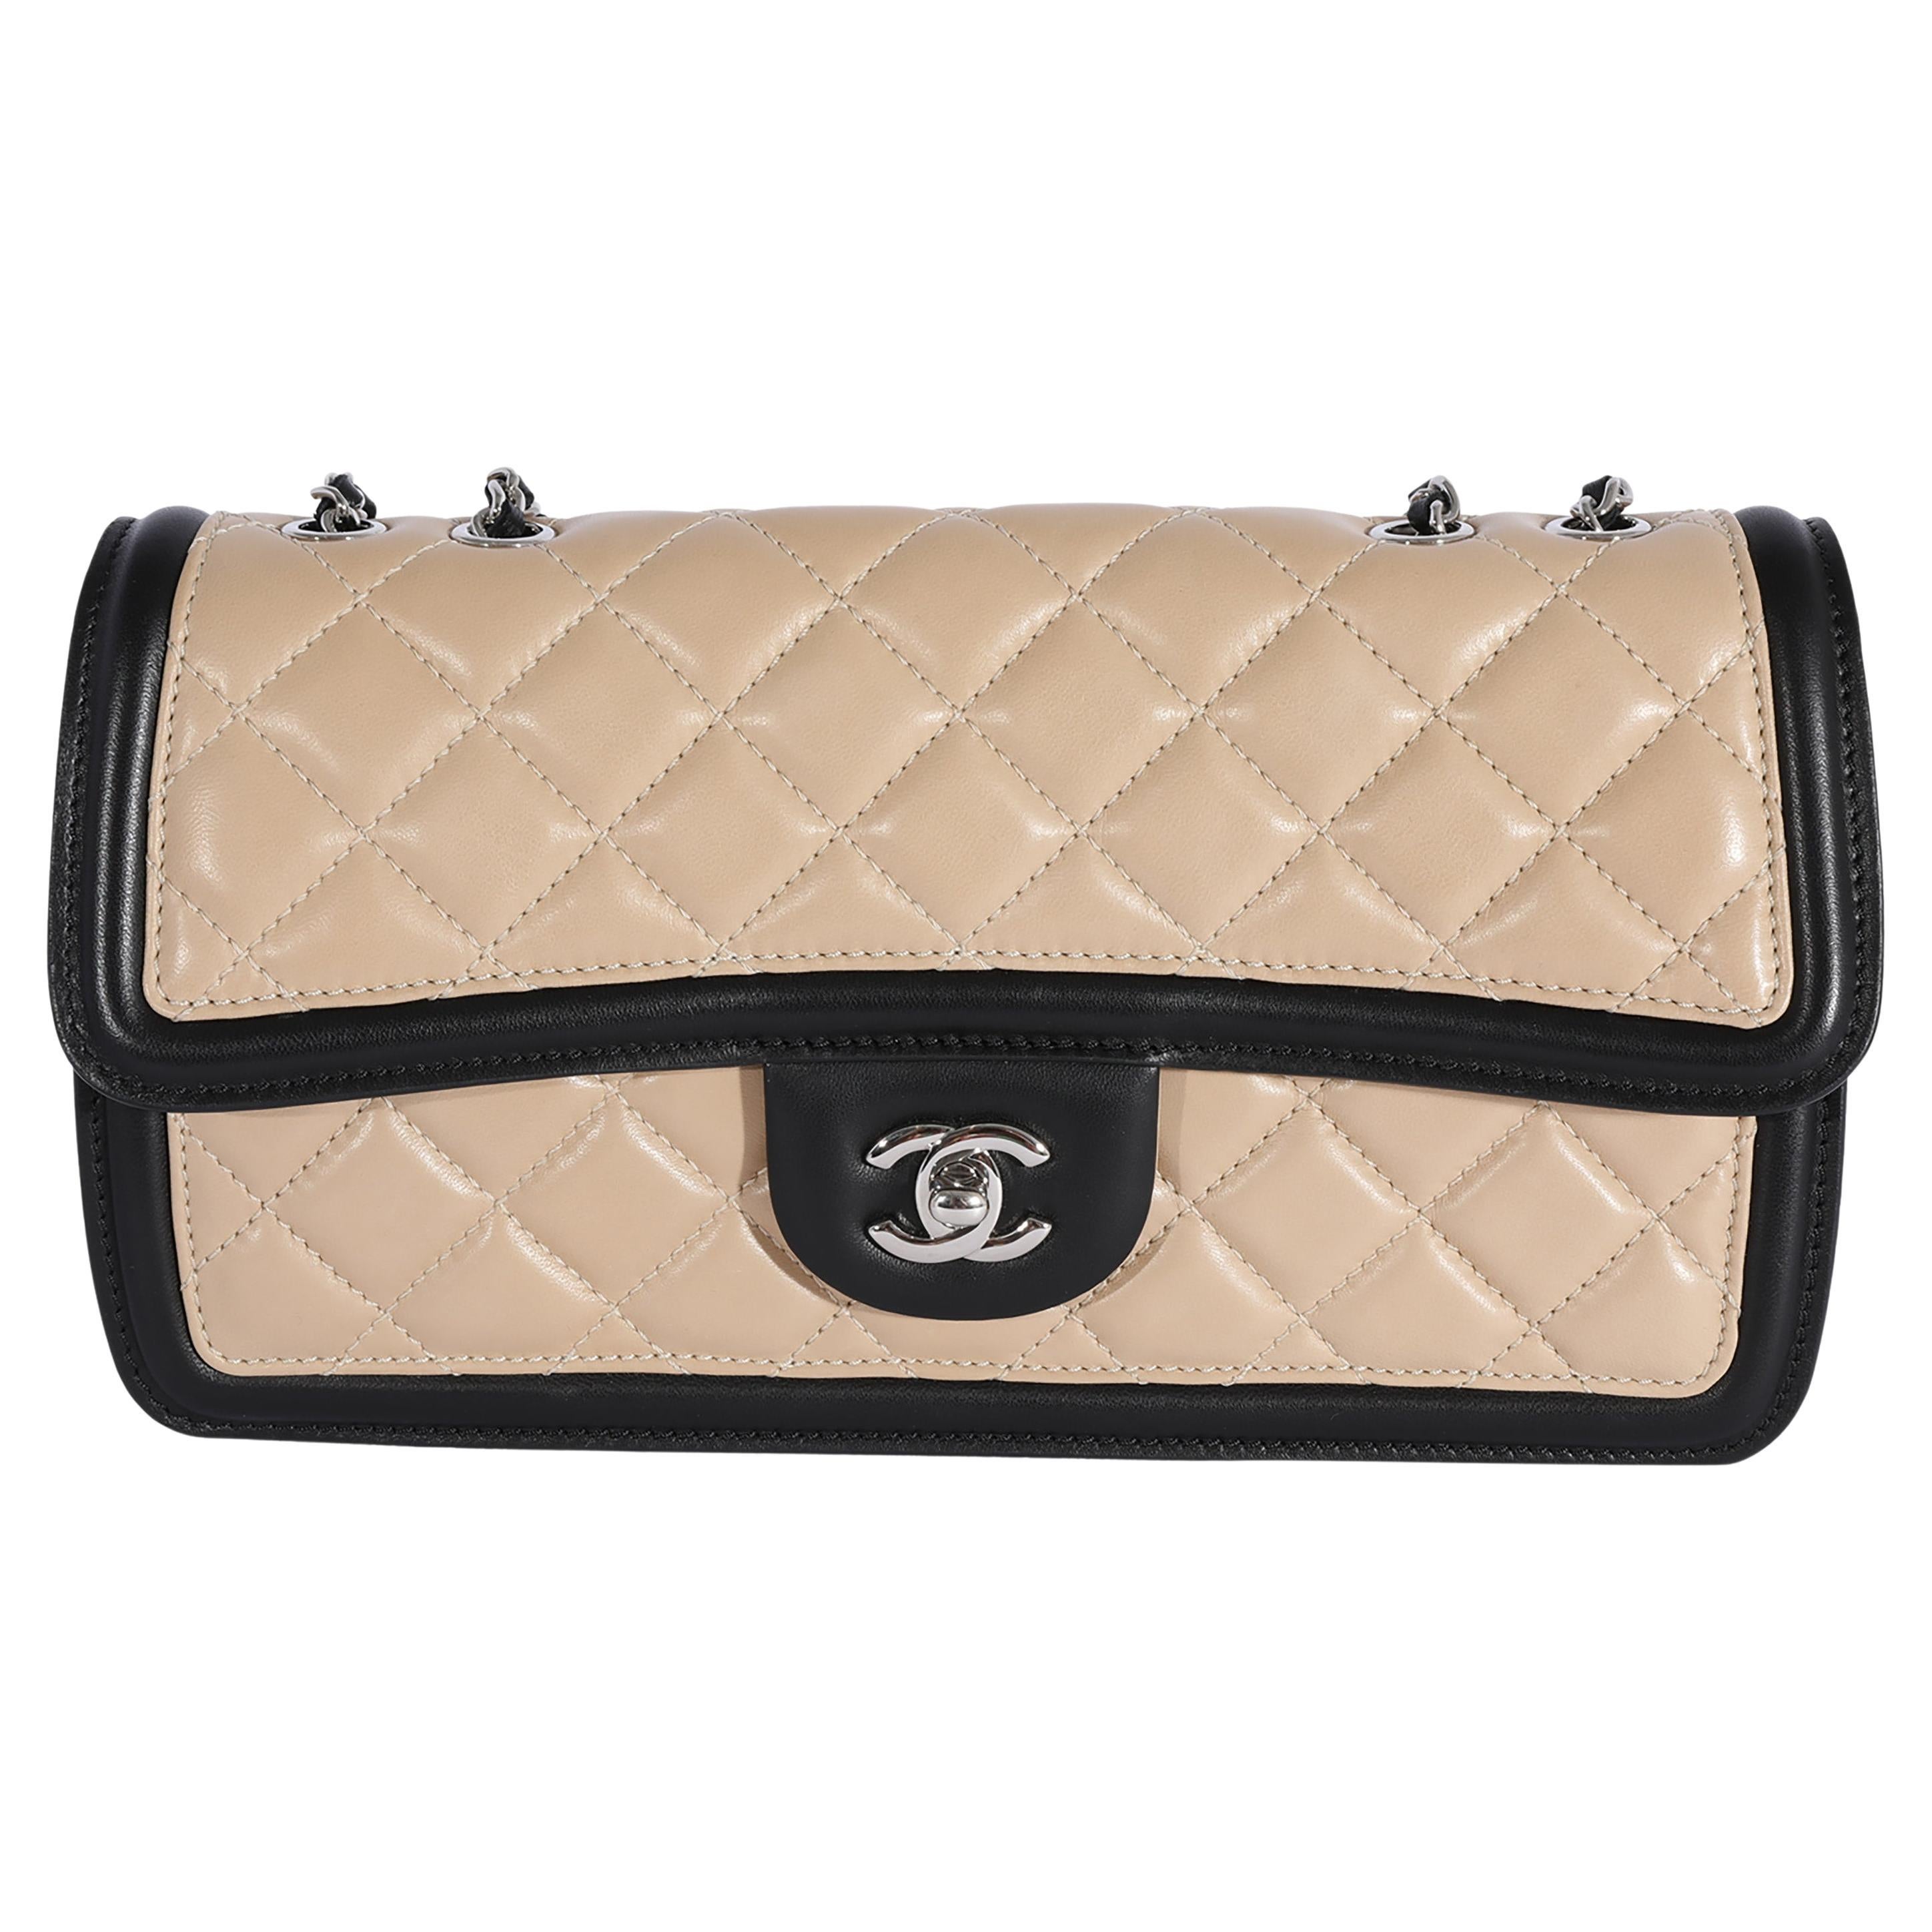 Chanel Tricolor Quilted Lambskin Medium Graphic Flap Bag